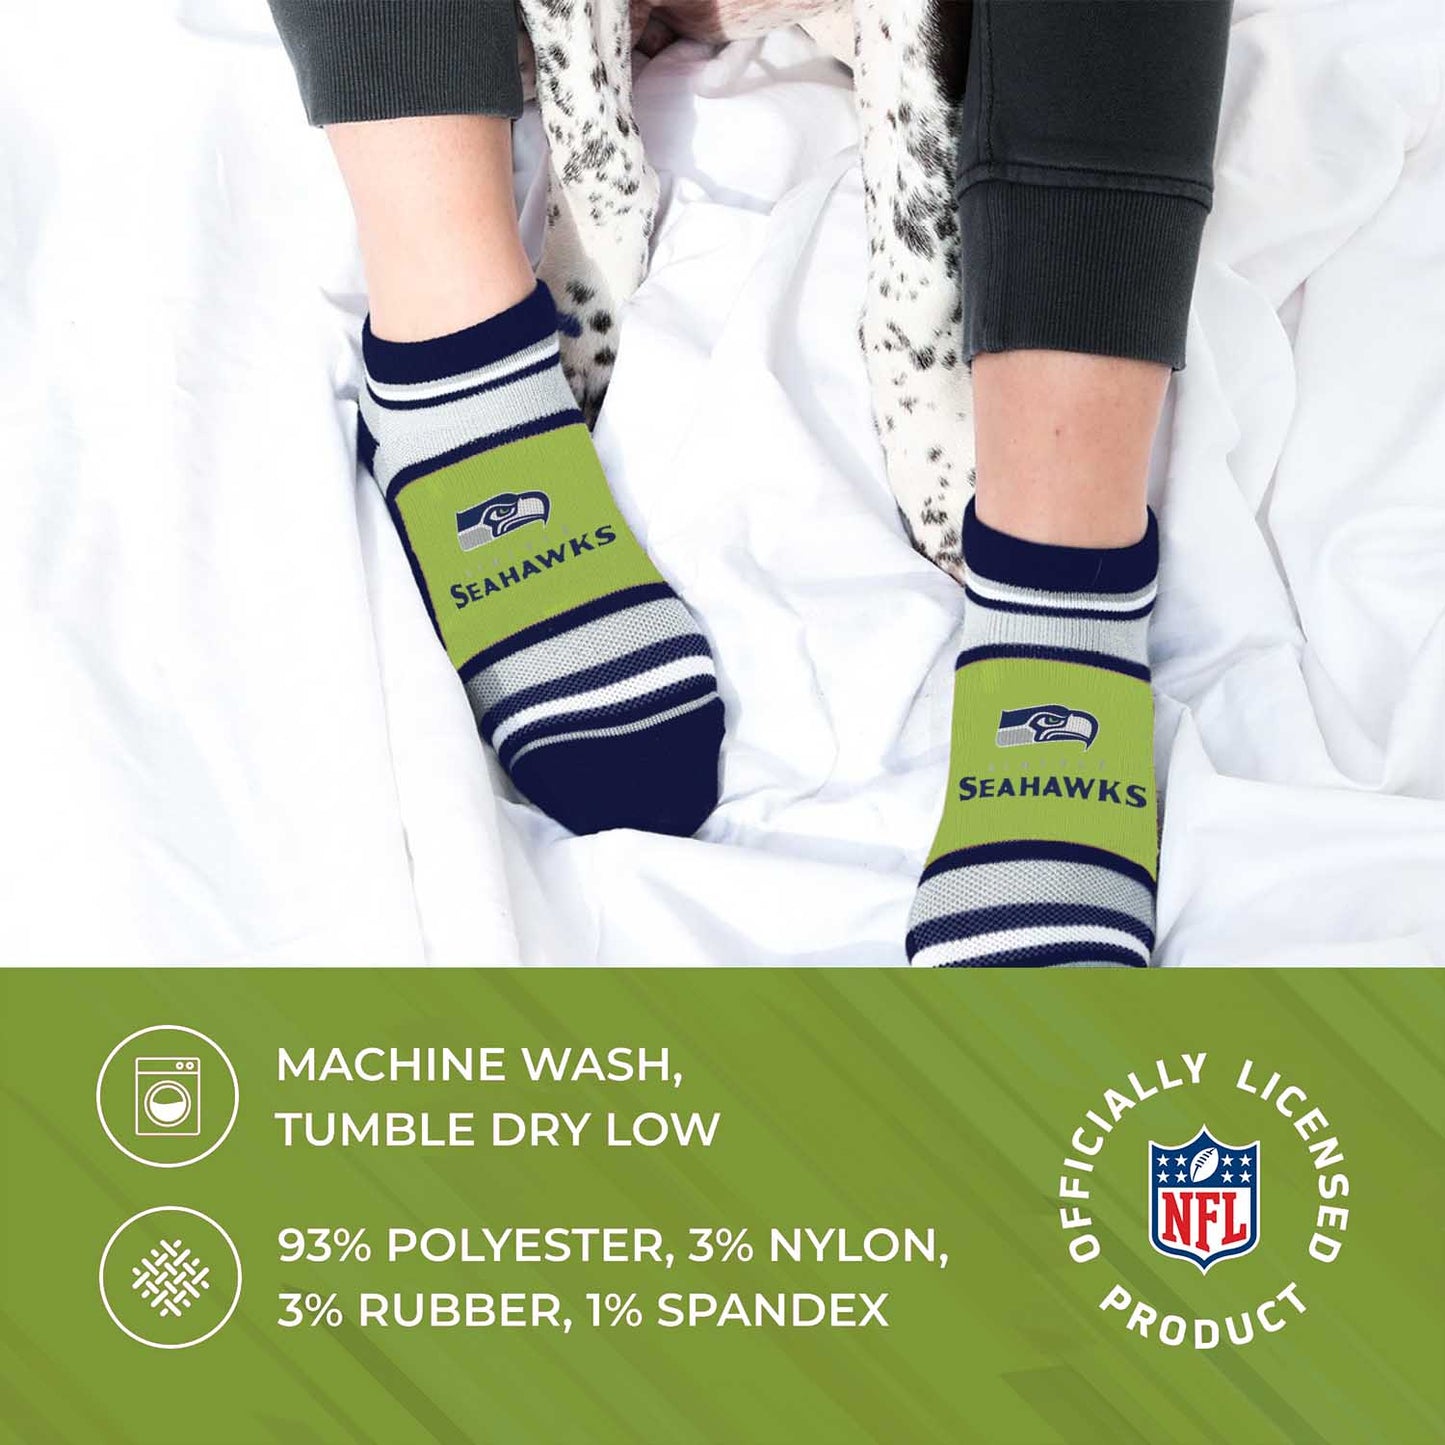 Seattle Seahawks Adult Marquis Addition No Show Socks - Navy